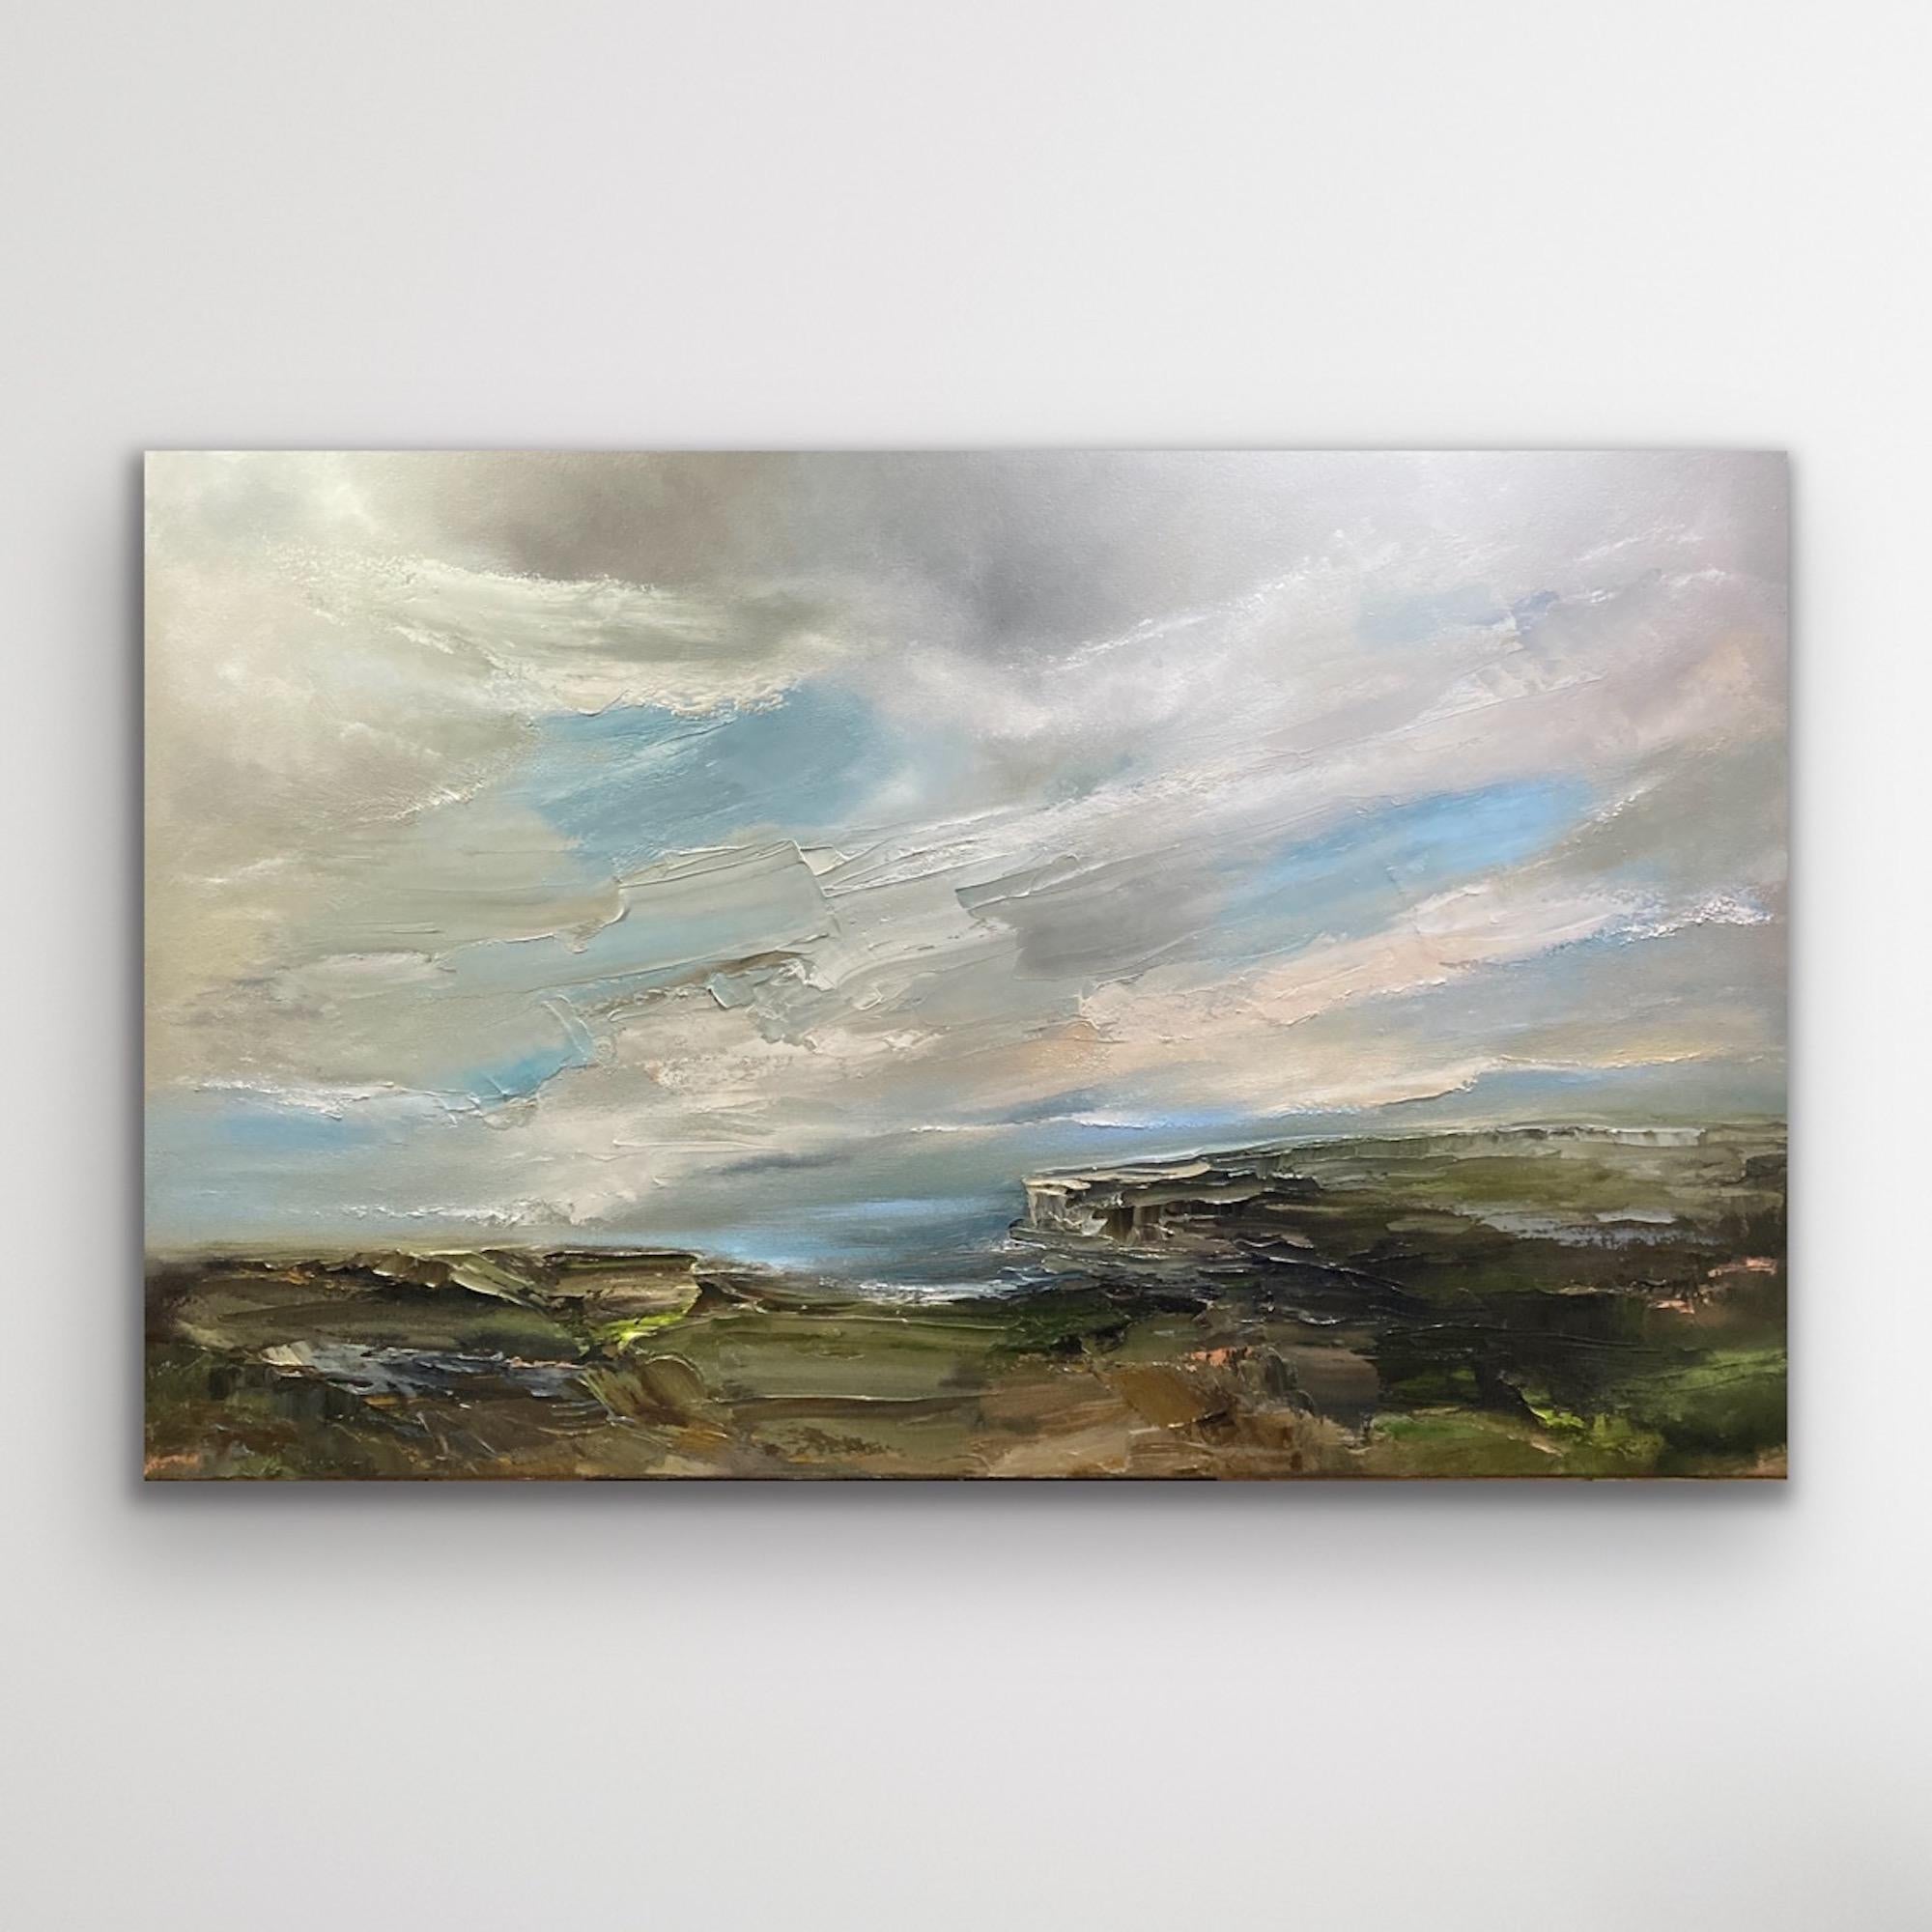 Cliff Top Walk is an original seascape by Helen Howells. It was inspired by the emotional responses and memories of walks. Taken along the South Wales coastline, not of any specific place, but rather an amalgamation that have calmed my mind, and